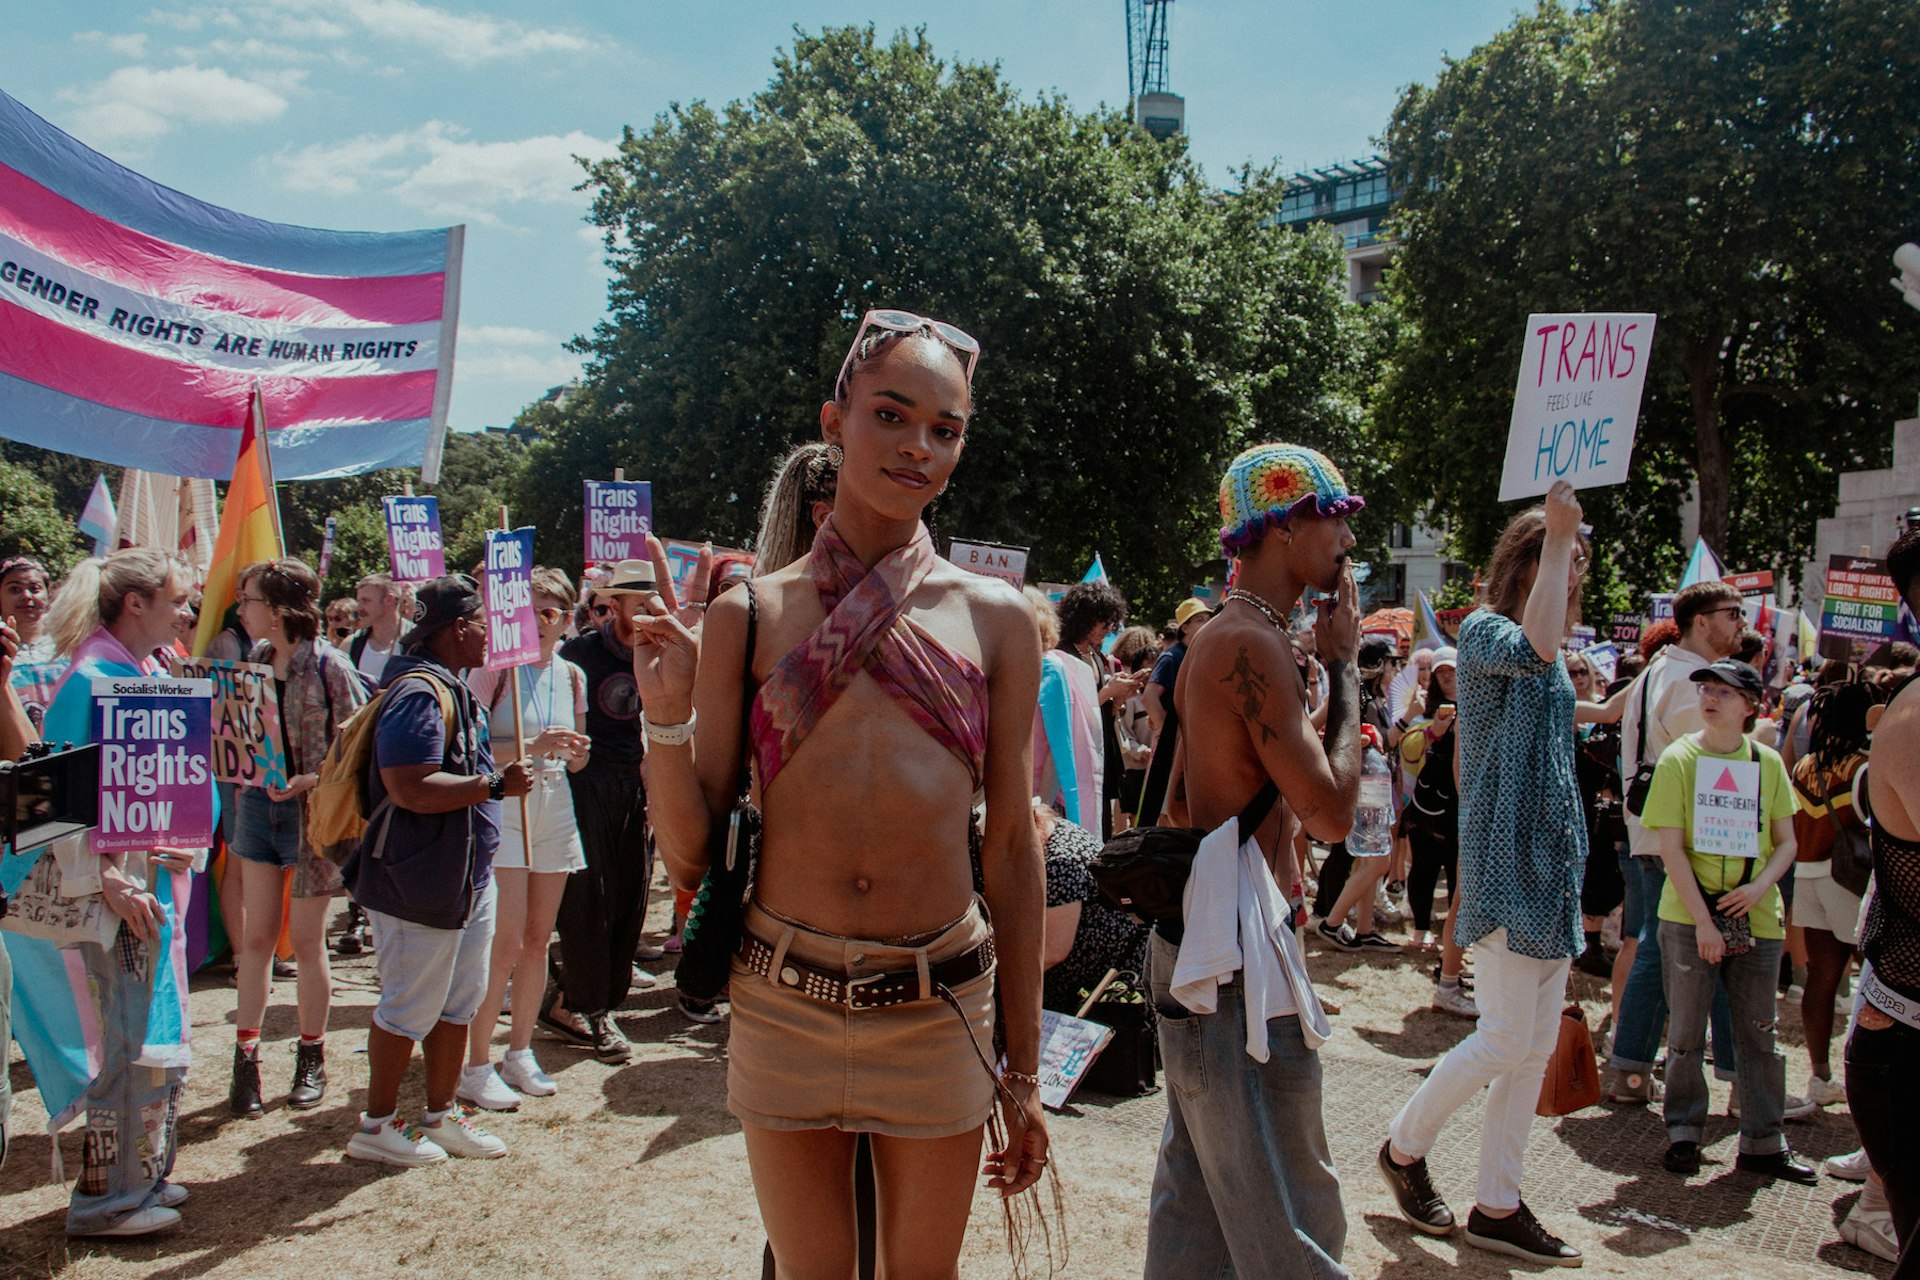 Joy and rage at Trans Pride London – in photos